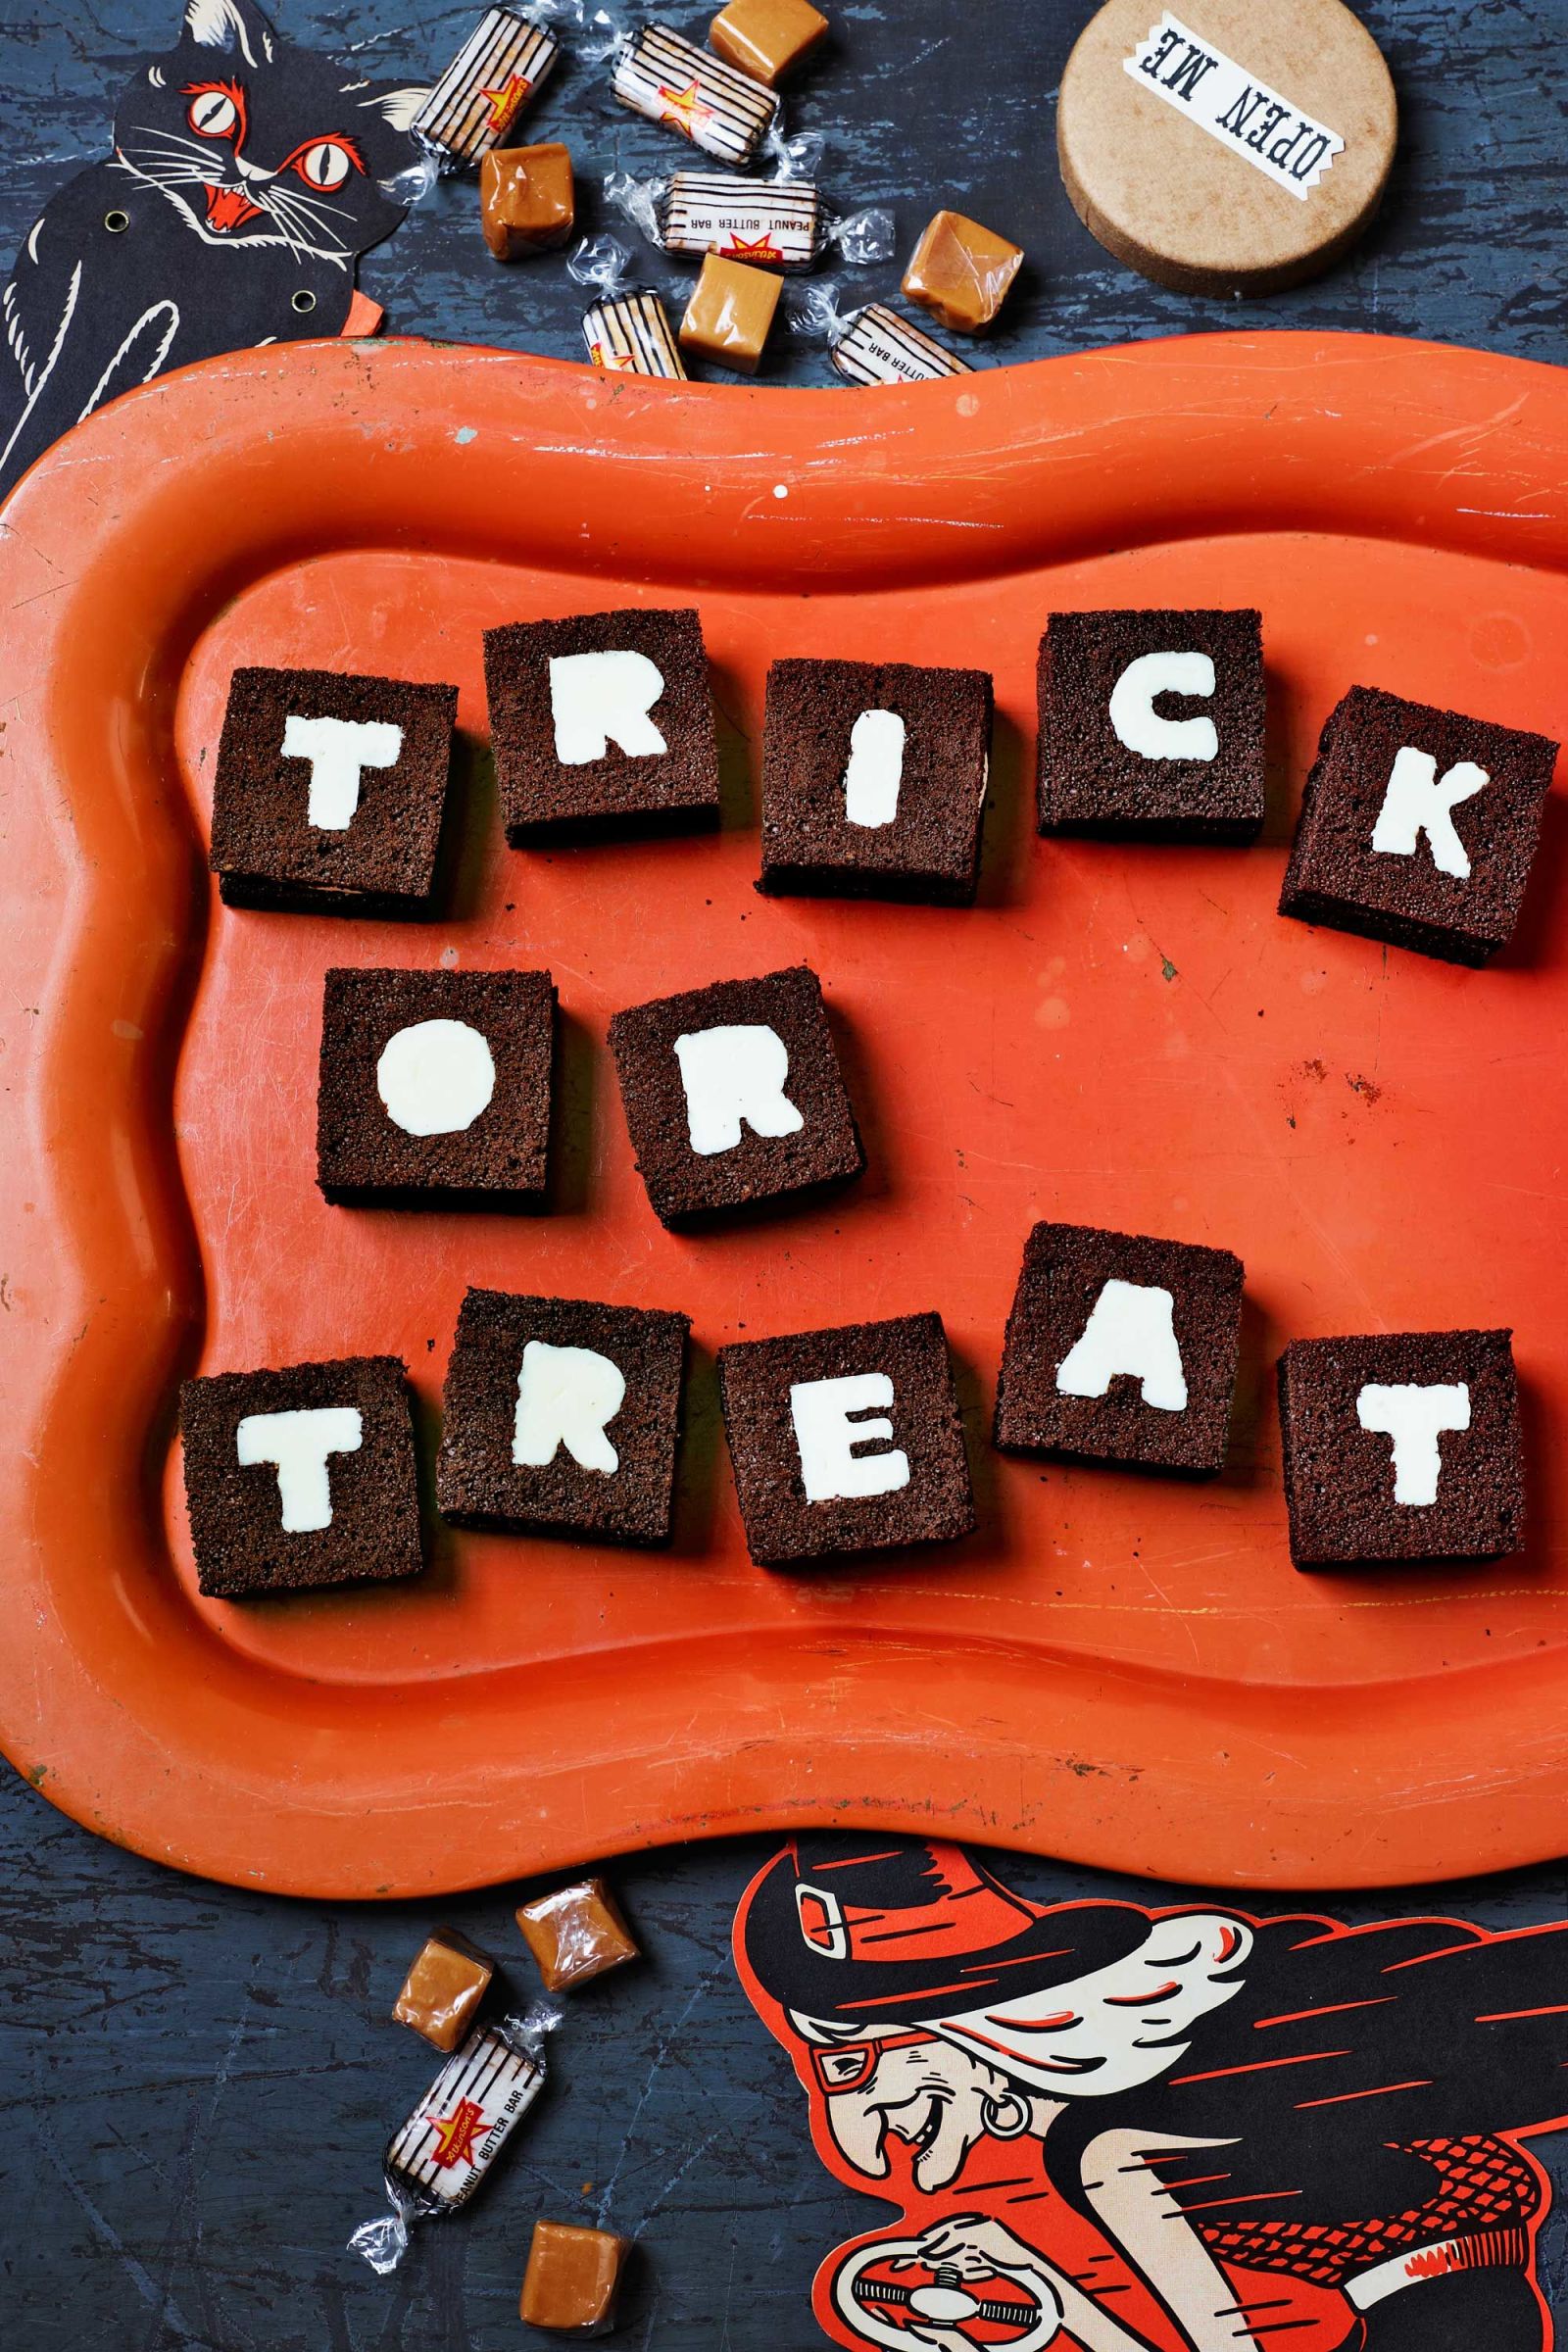 Trick or treat cake sandwiches